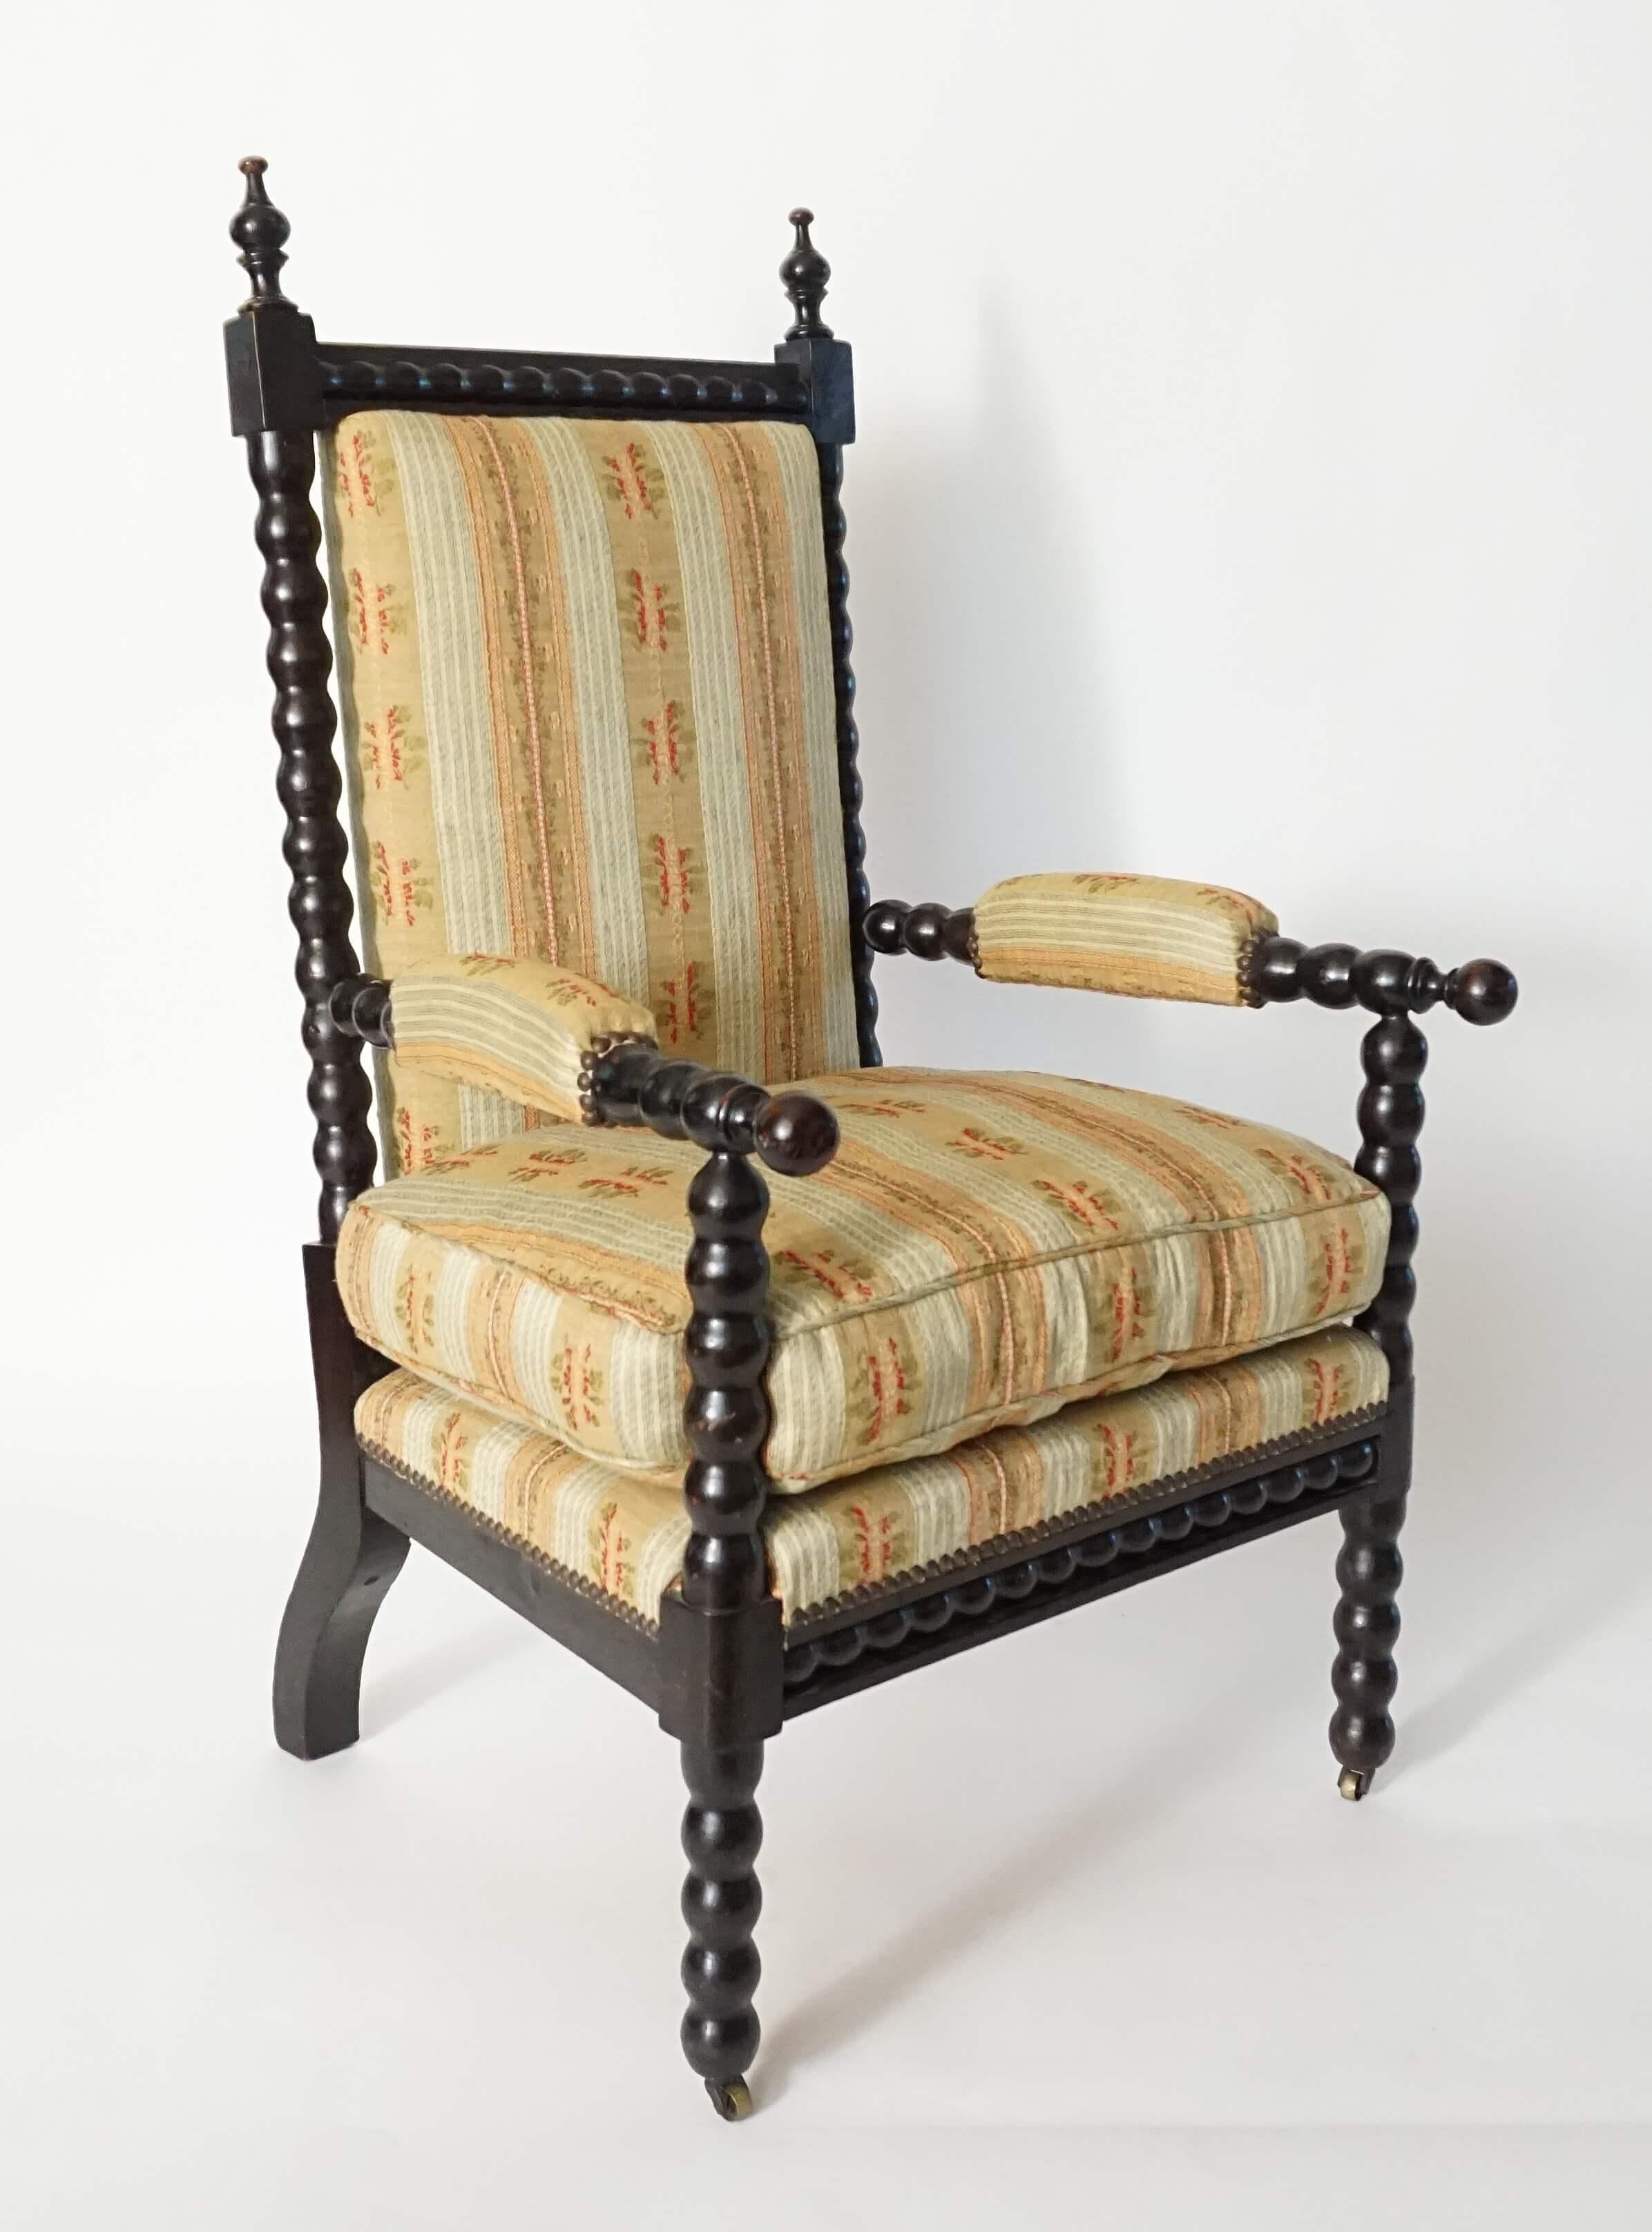 Elegant circa 1860 French Napoleon III period armchair having original ebonized finish on spool or bobbin-turned chestnut frame, the rectangular upholstered back with inset-bobbin-channel top rail connecting finial-topped stiles joining upholstered